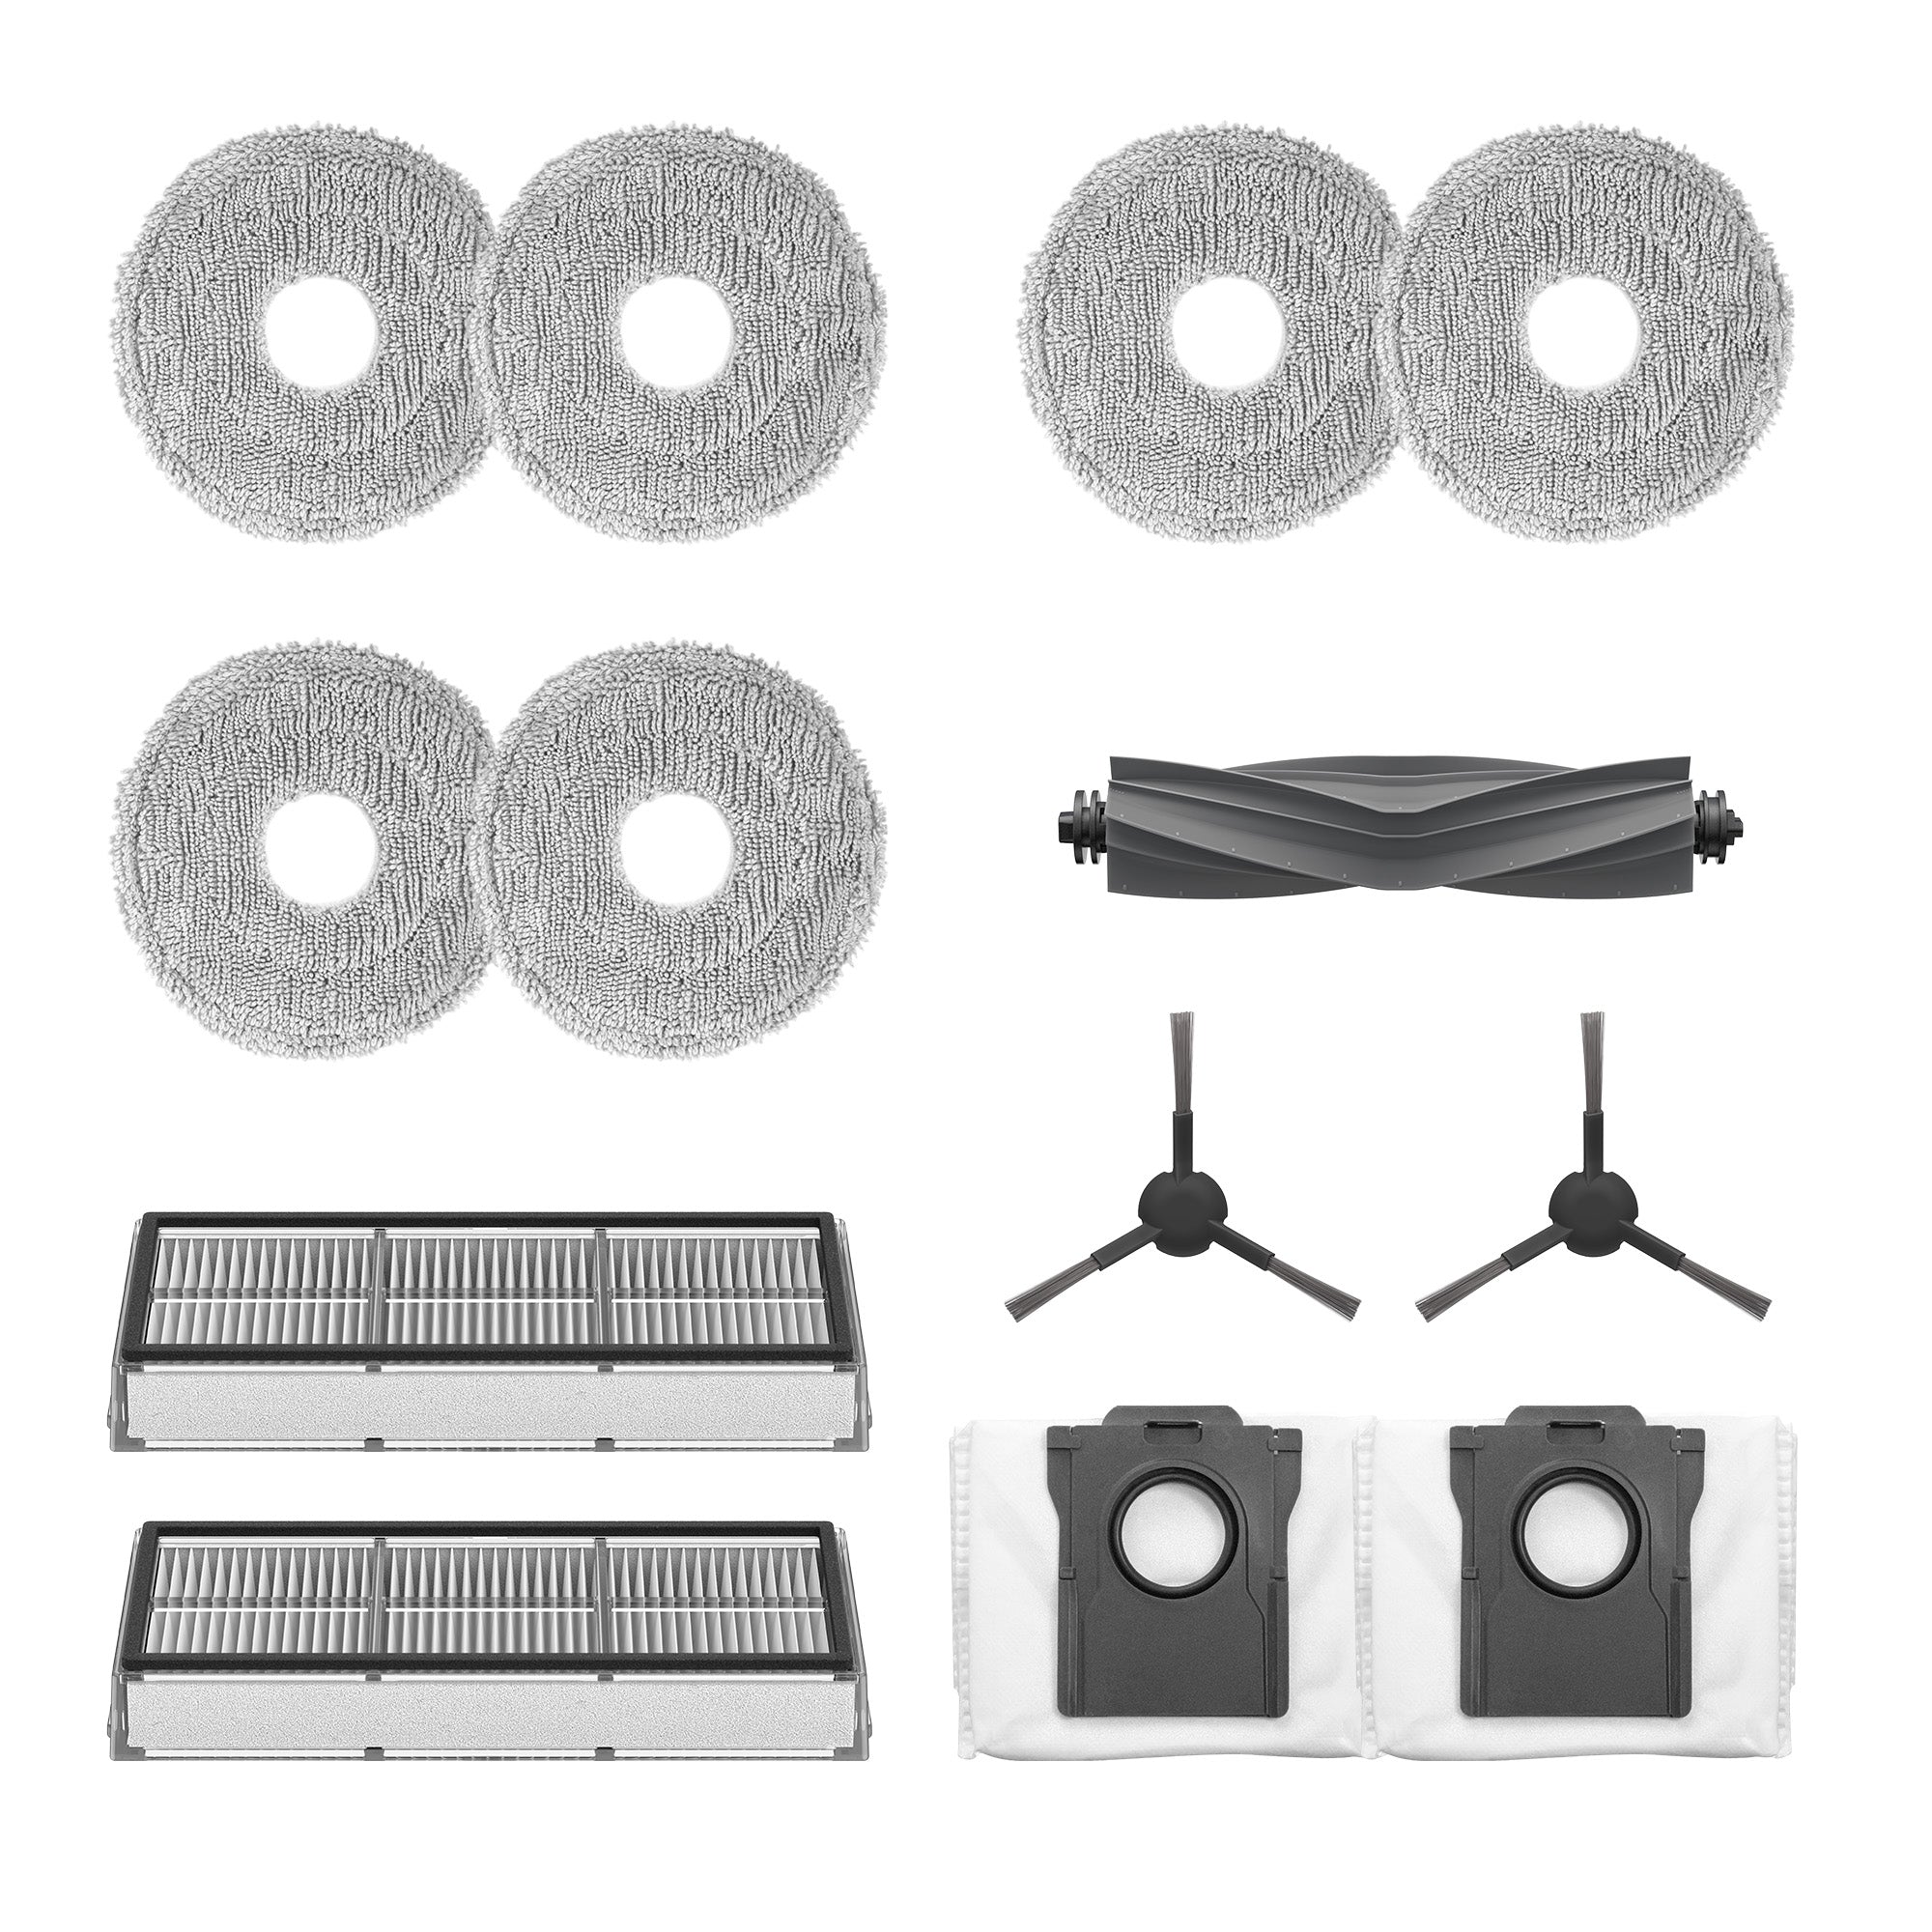 Dreame Accessories Kit for L10s Pro Ultra Heat